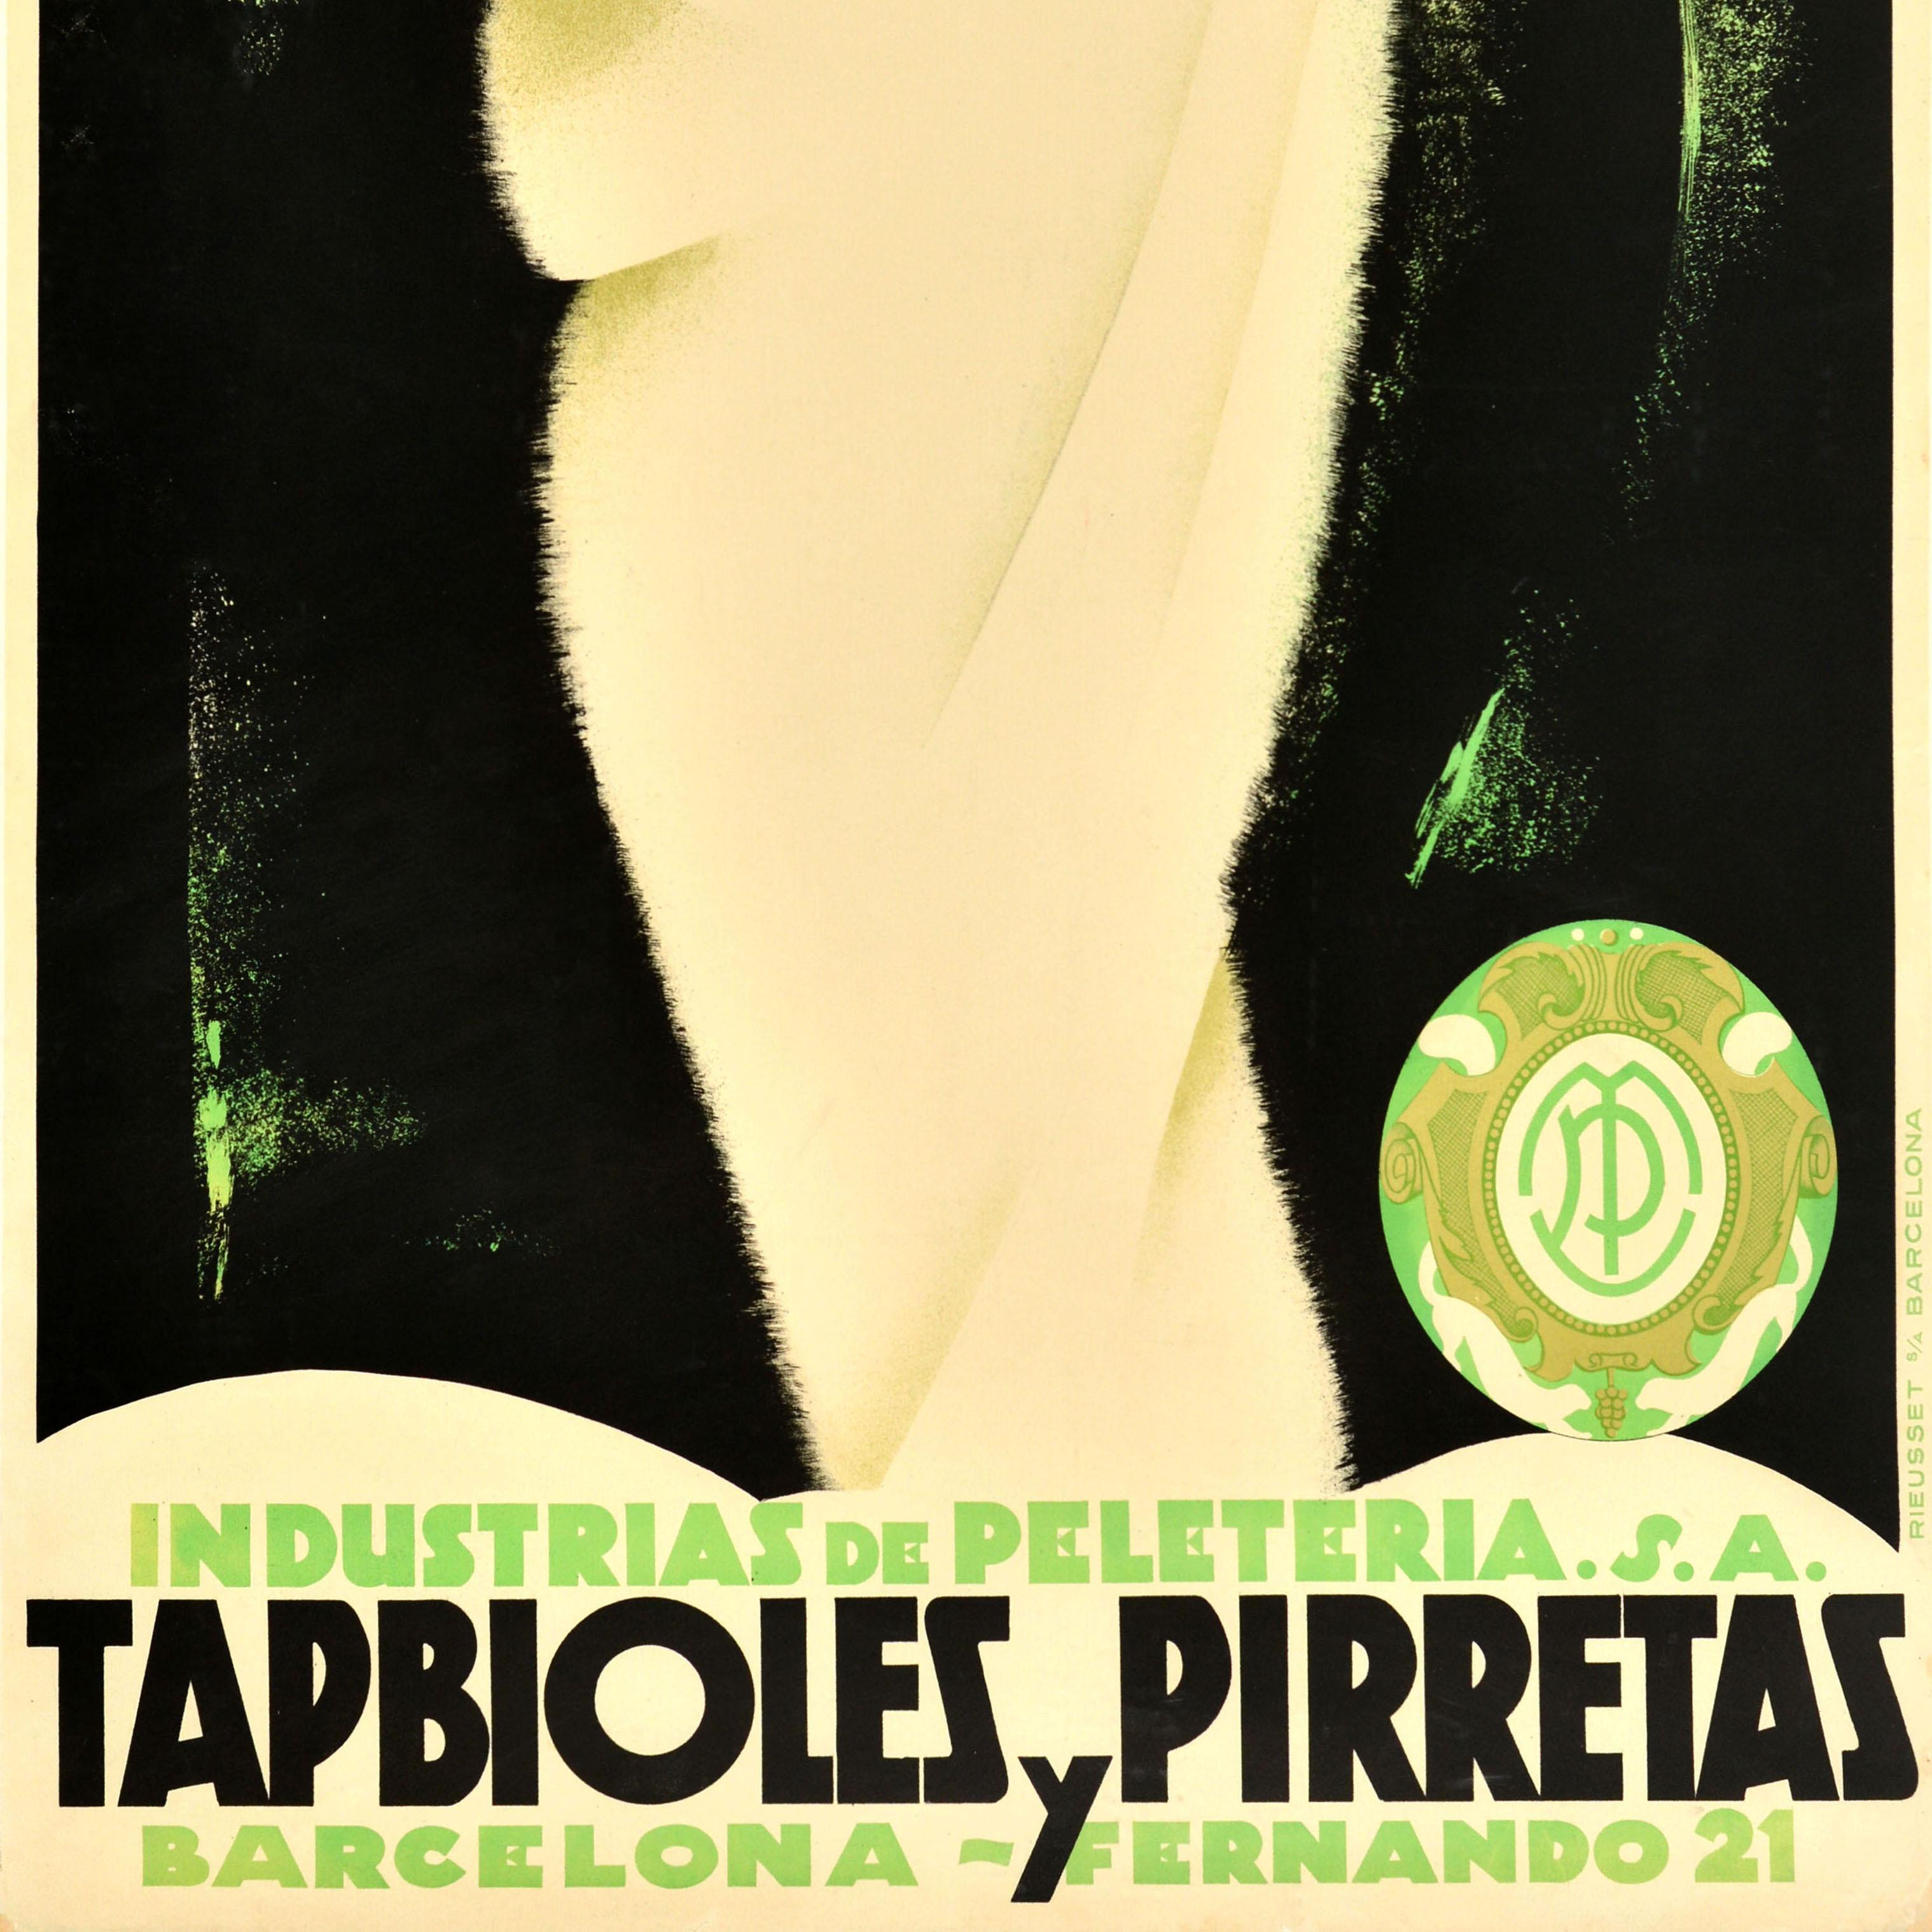 Original vintage Spanish clothing advertising poster - Industrias de Peleteria Tapbioles y Pirretas Fur Industry Barcelona - featuring an elegant Art Deco design by the Czech artist Karel Cerny (1910-1960) depicting a fashionably dressed lady in